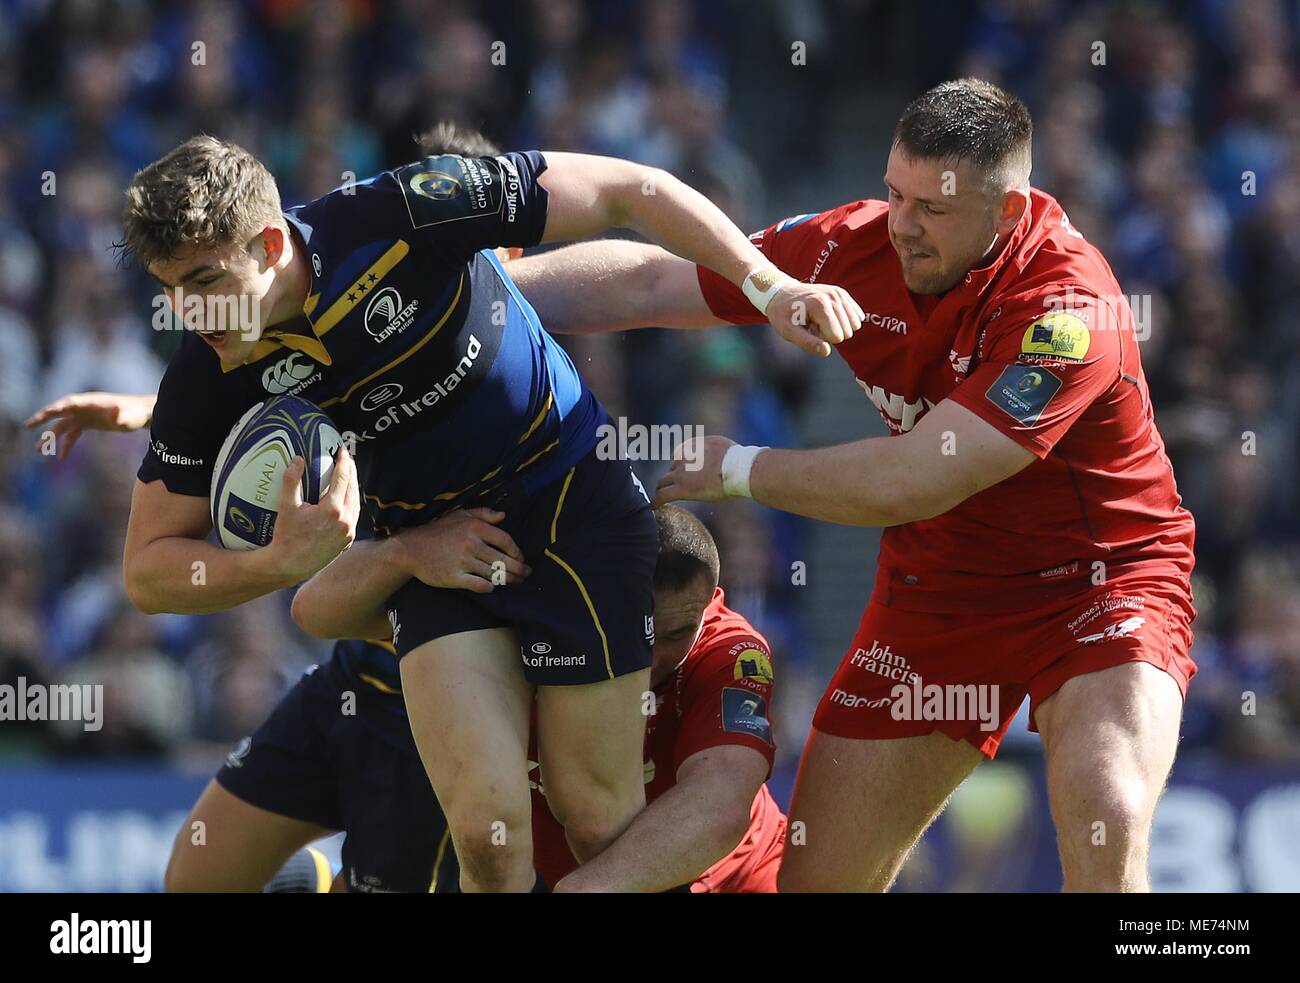 Leinster's Garry Ringrose and Rob Evans of Scarlets during the